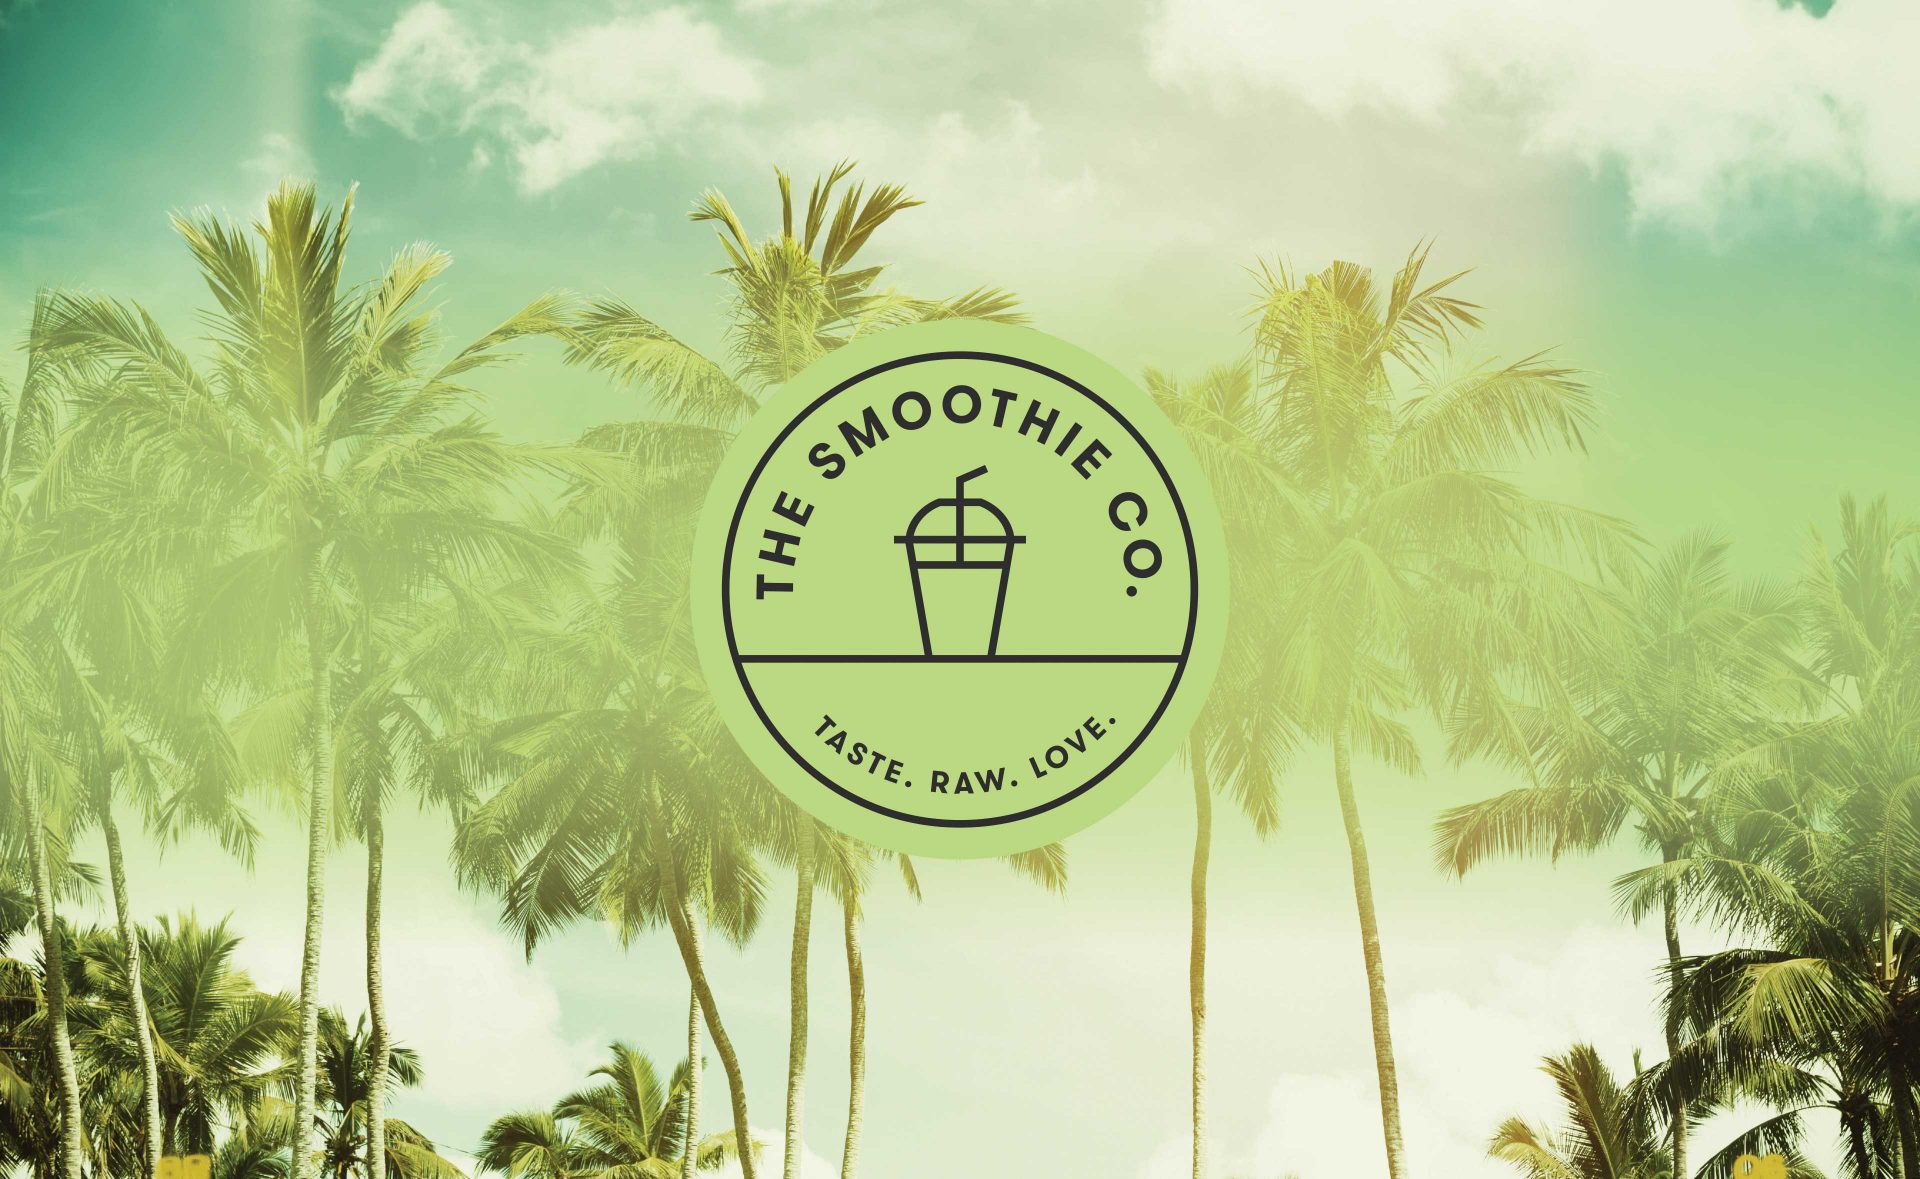 The Smoothie Co - Branding for Health and Wellness Product